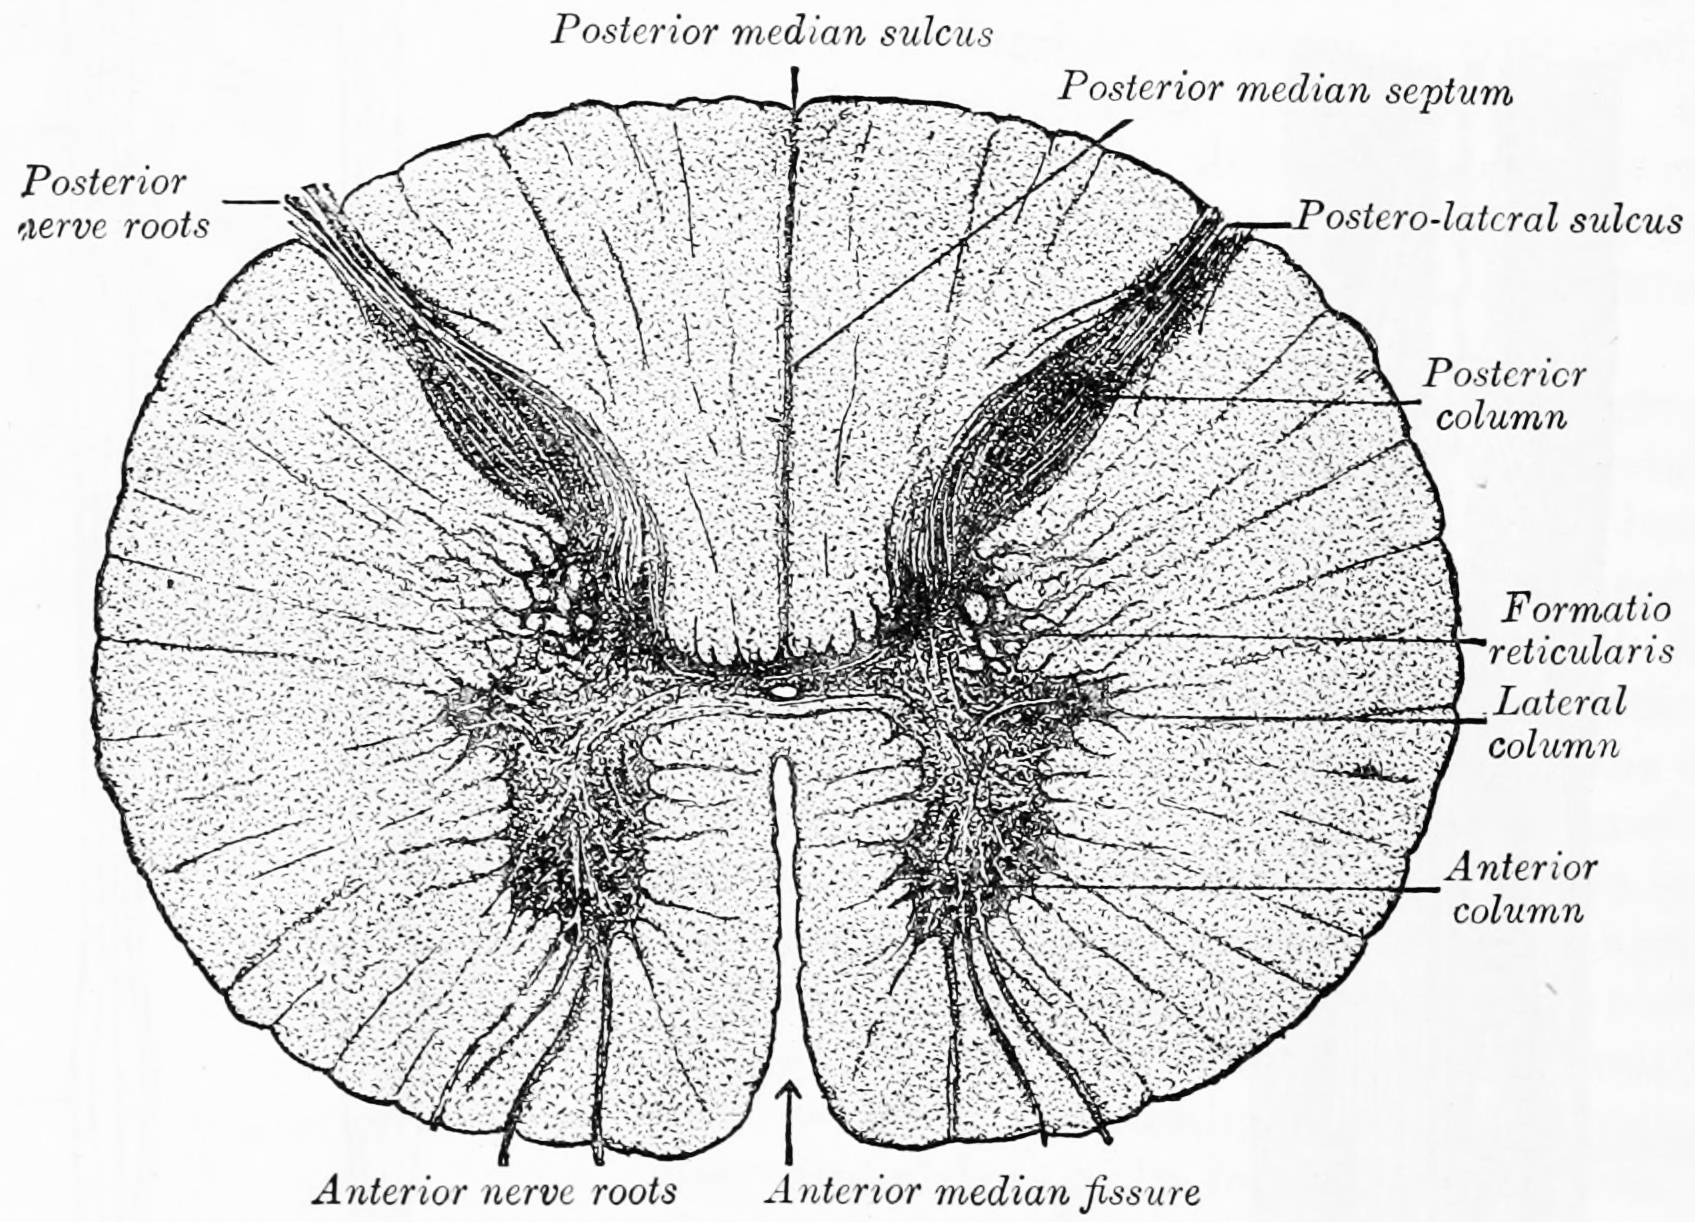 Transverse section of the medulla spinalis in the mid-thoracic region. From Gray Henry, Anatomy of the Human Body. 20th Edition, Lea & Febiger, Philadelphia & New York, 1918